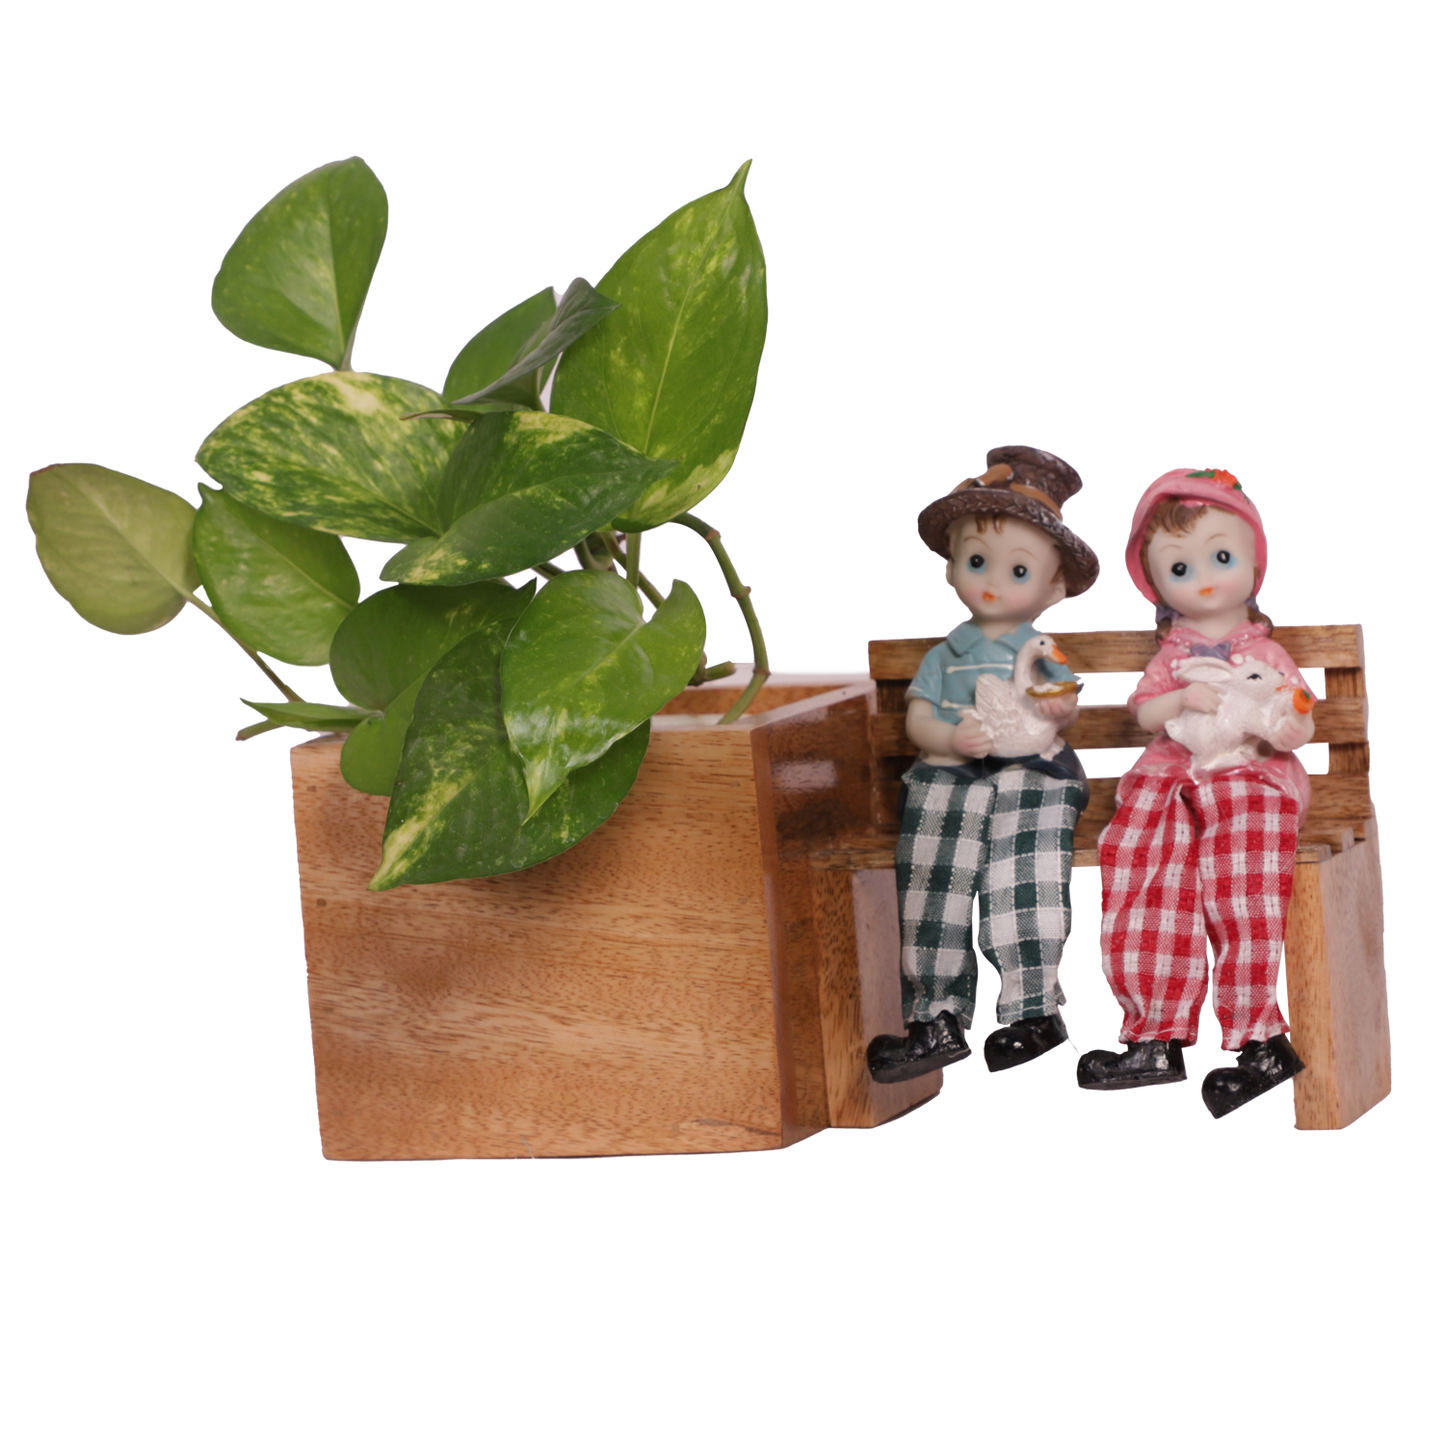 The Weaver's Nest Wooden Bench Planter with Figurine for Home, Porch, Balcony, Garden, Living Room